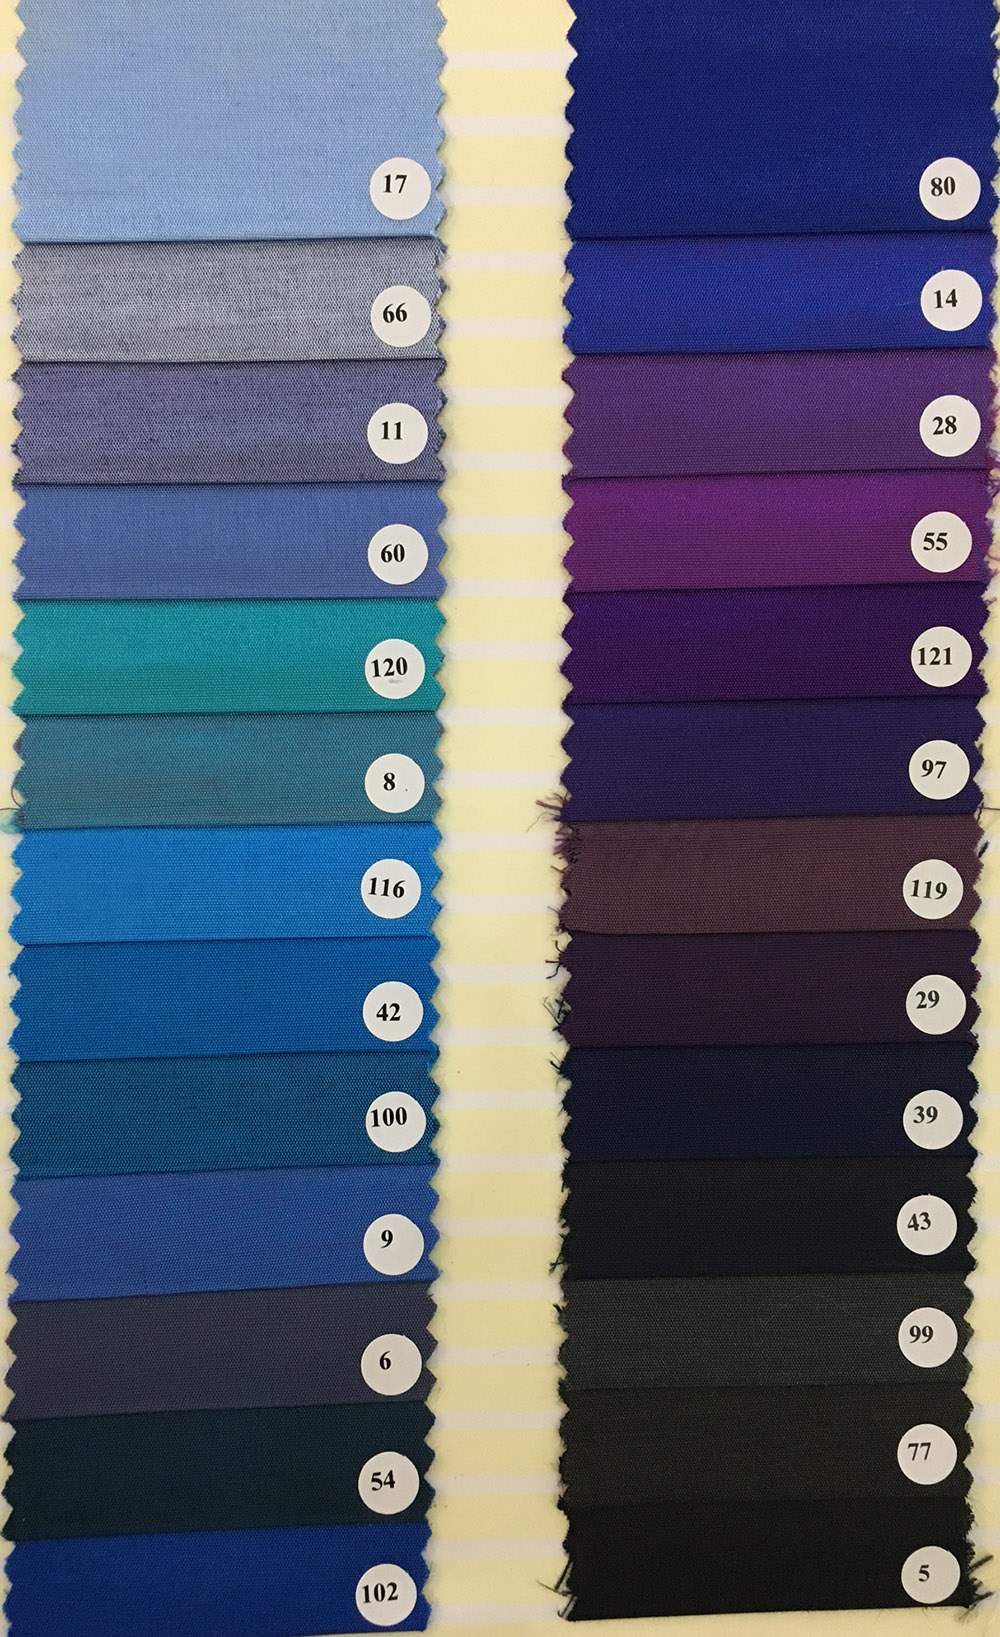 Fabric Color Chart With Names